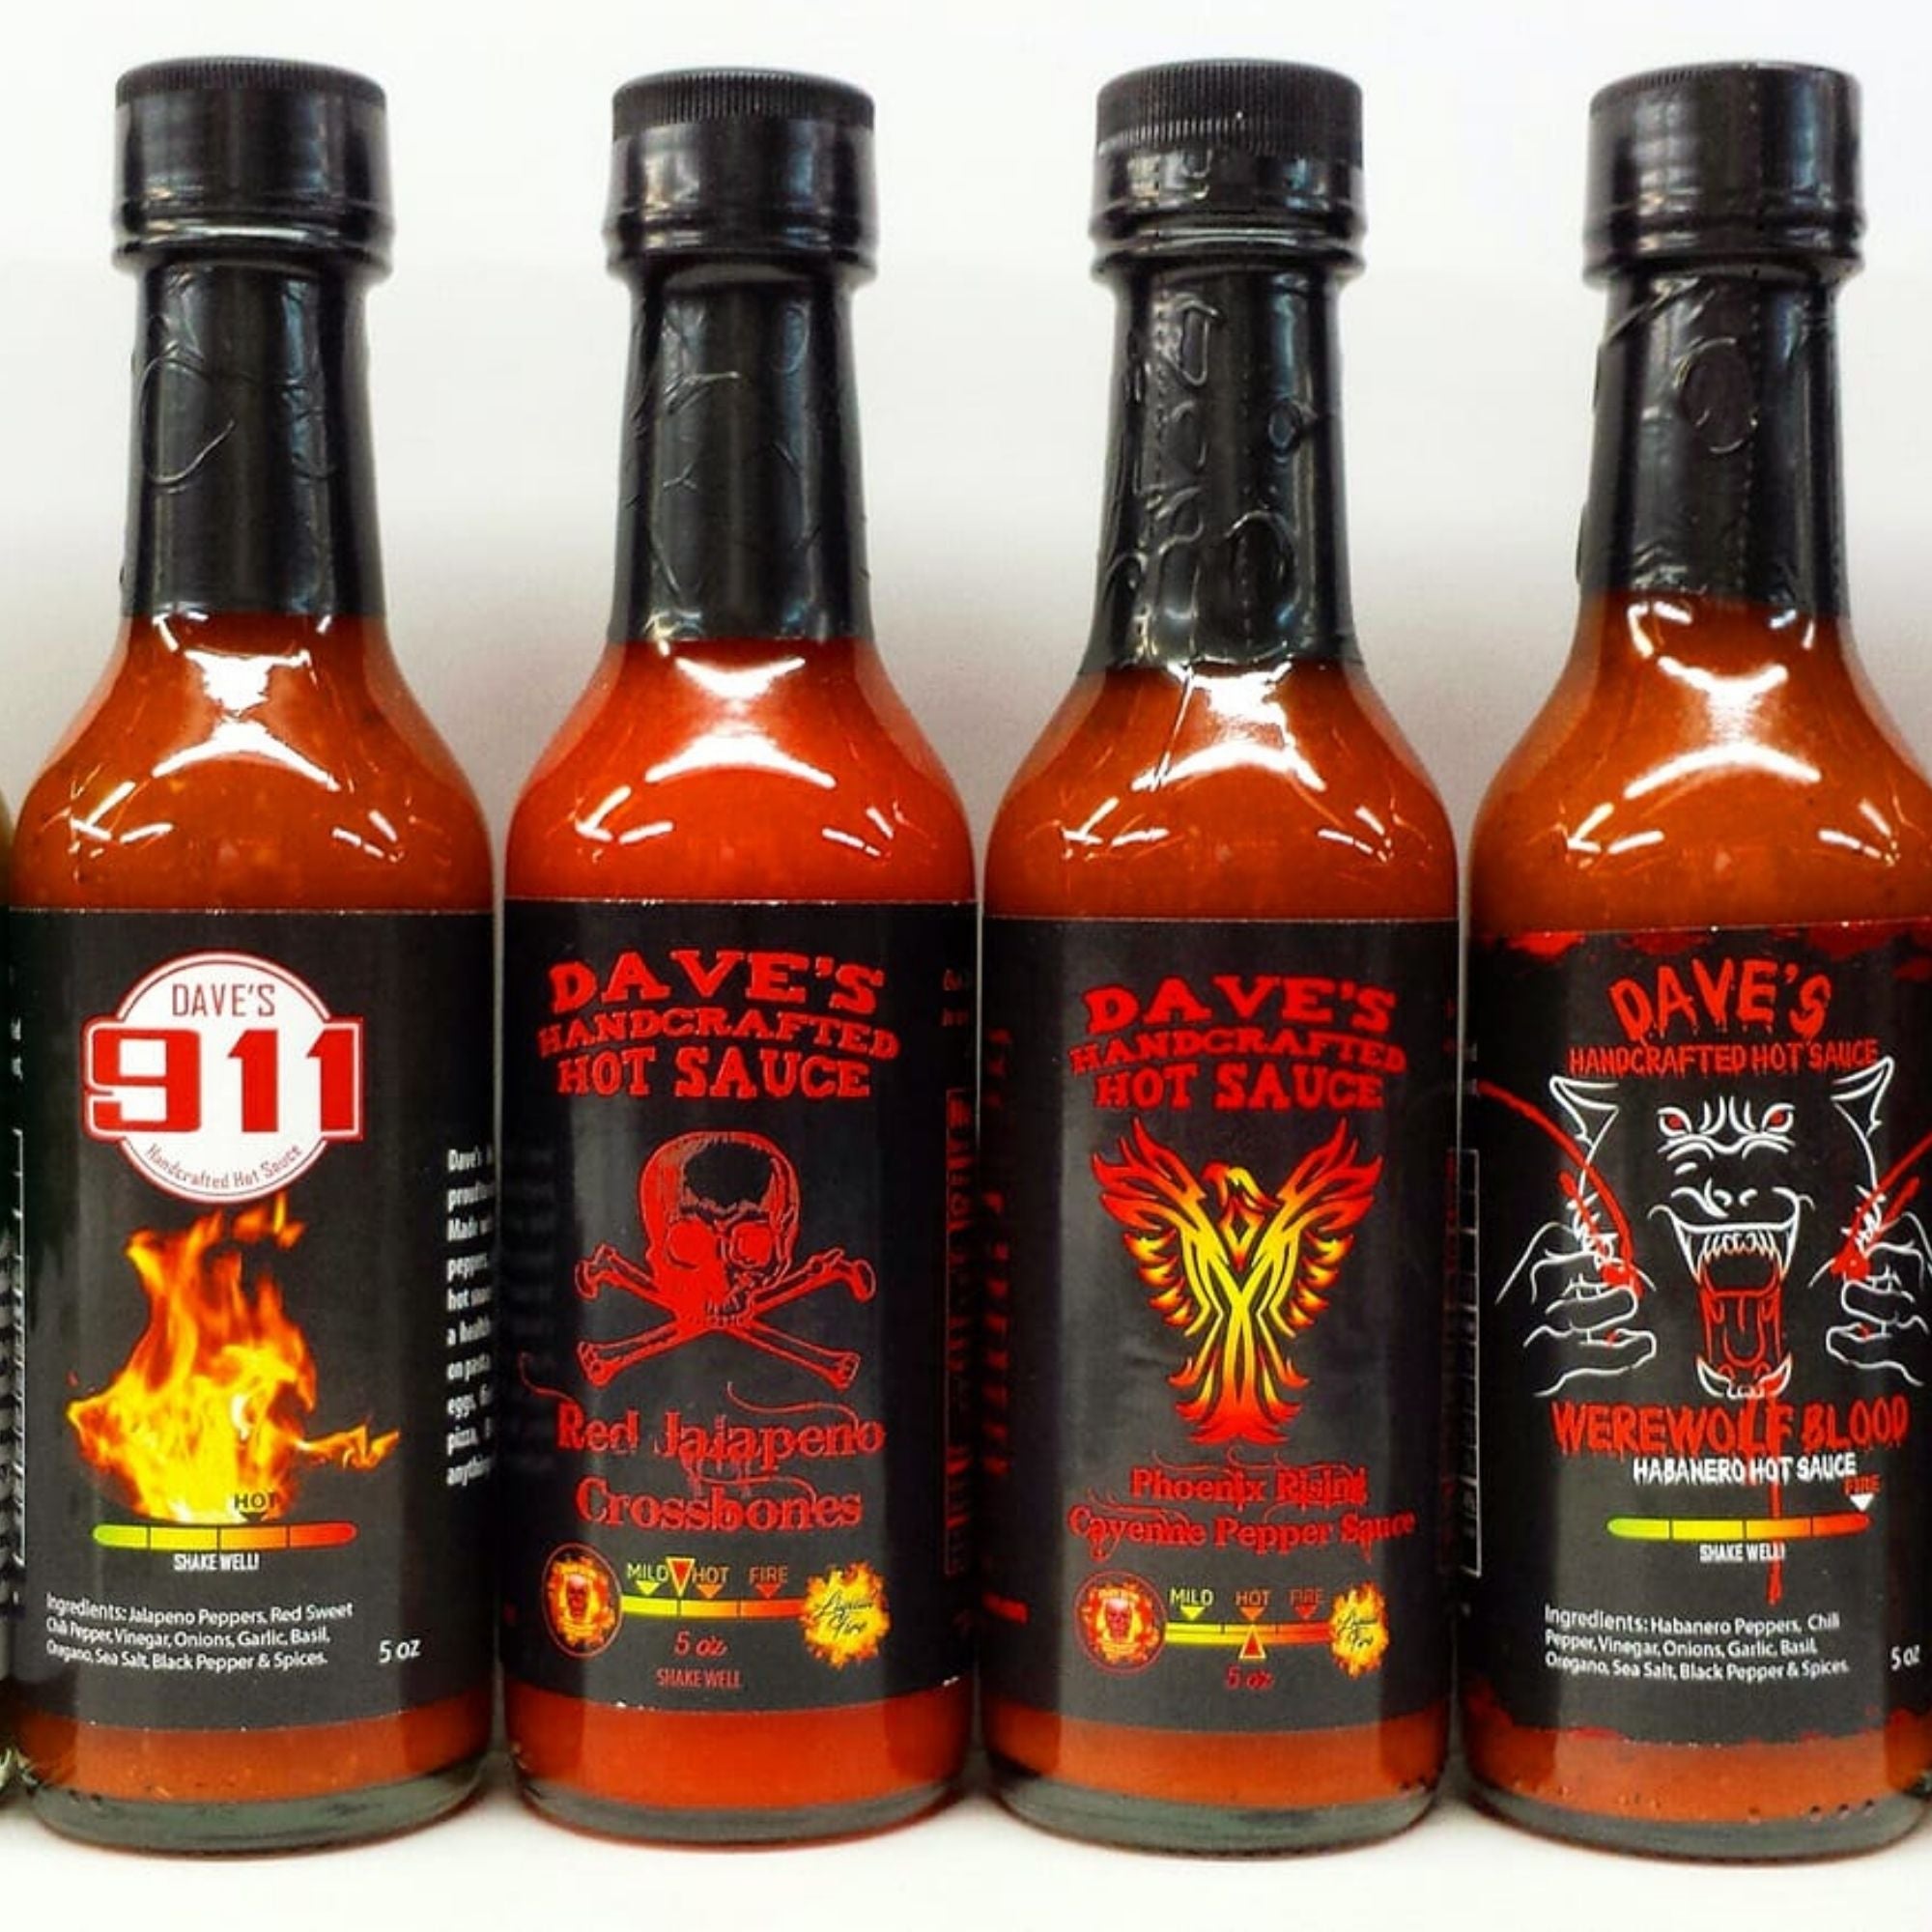 daves handcrafted hot sauce story